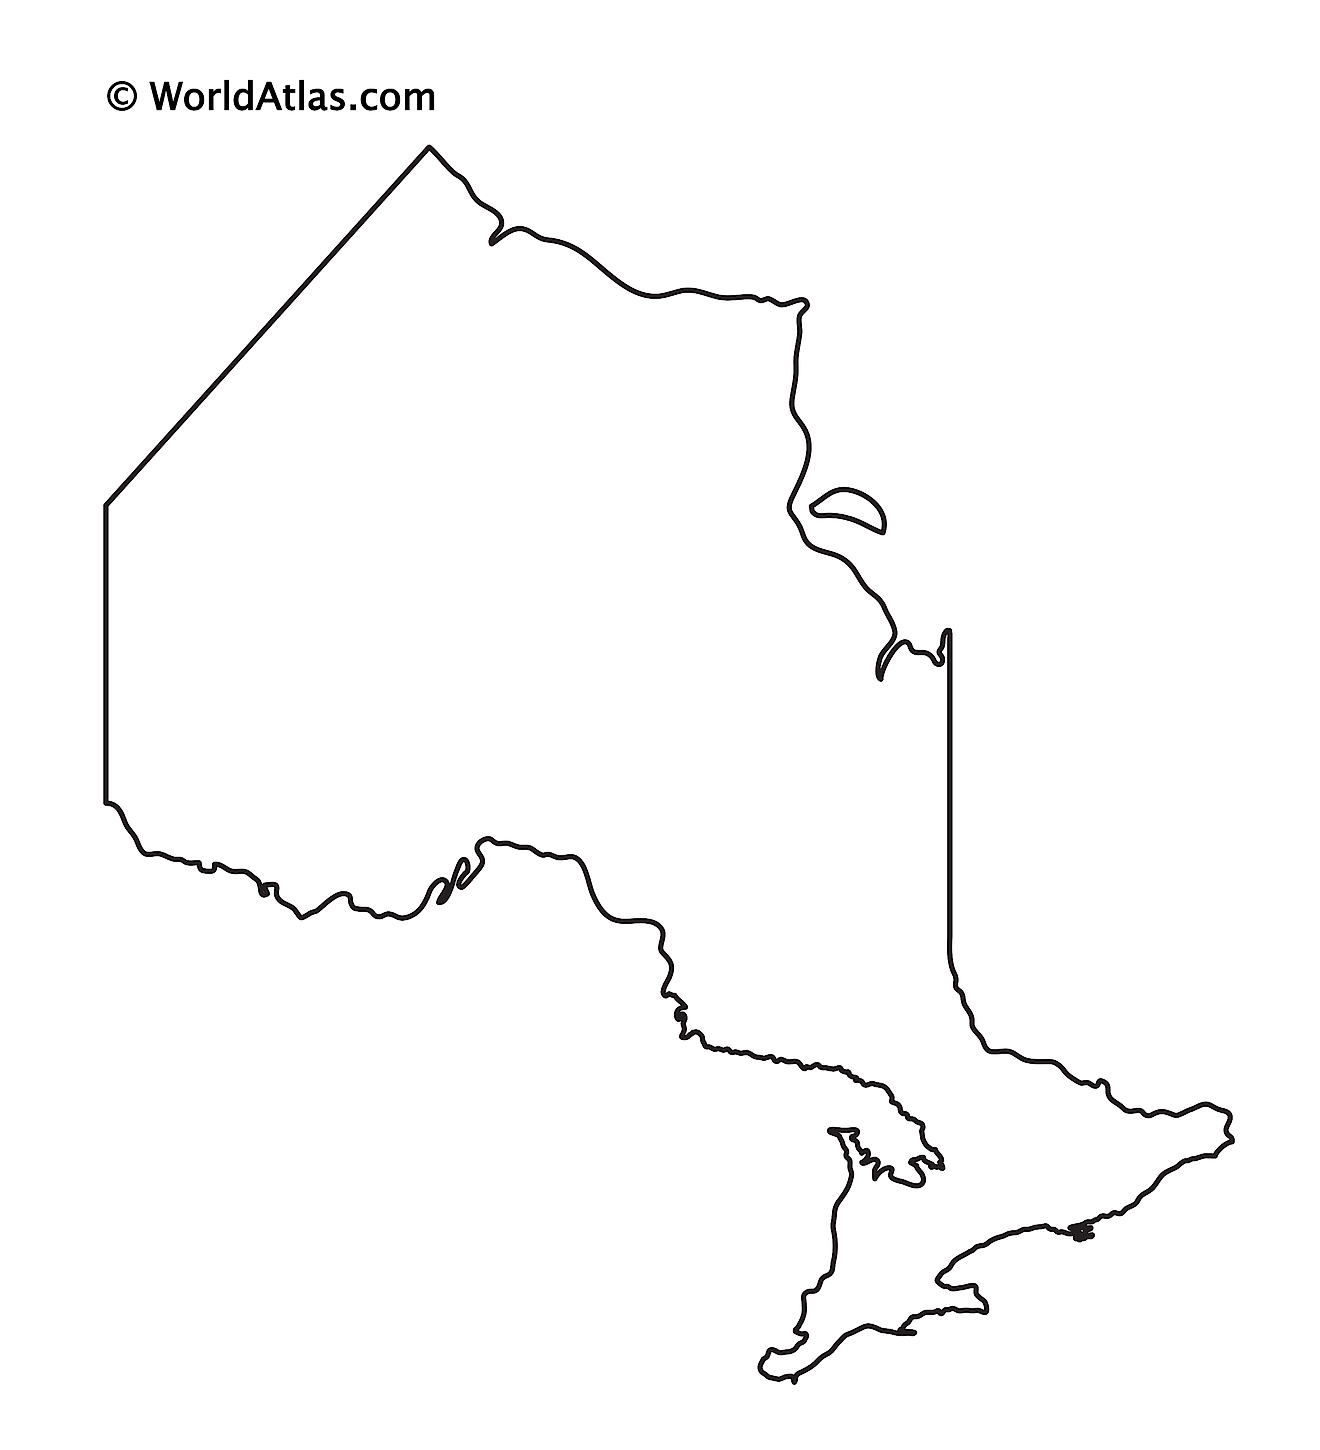 Blank Outline Map of Ontario